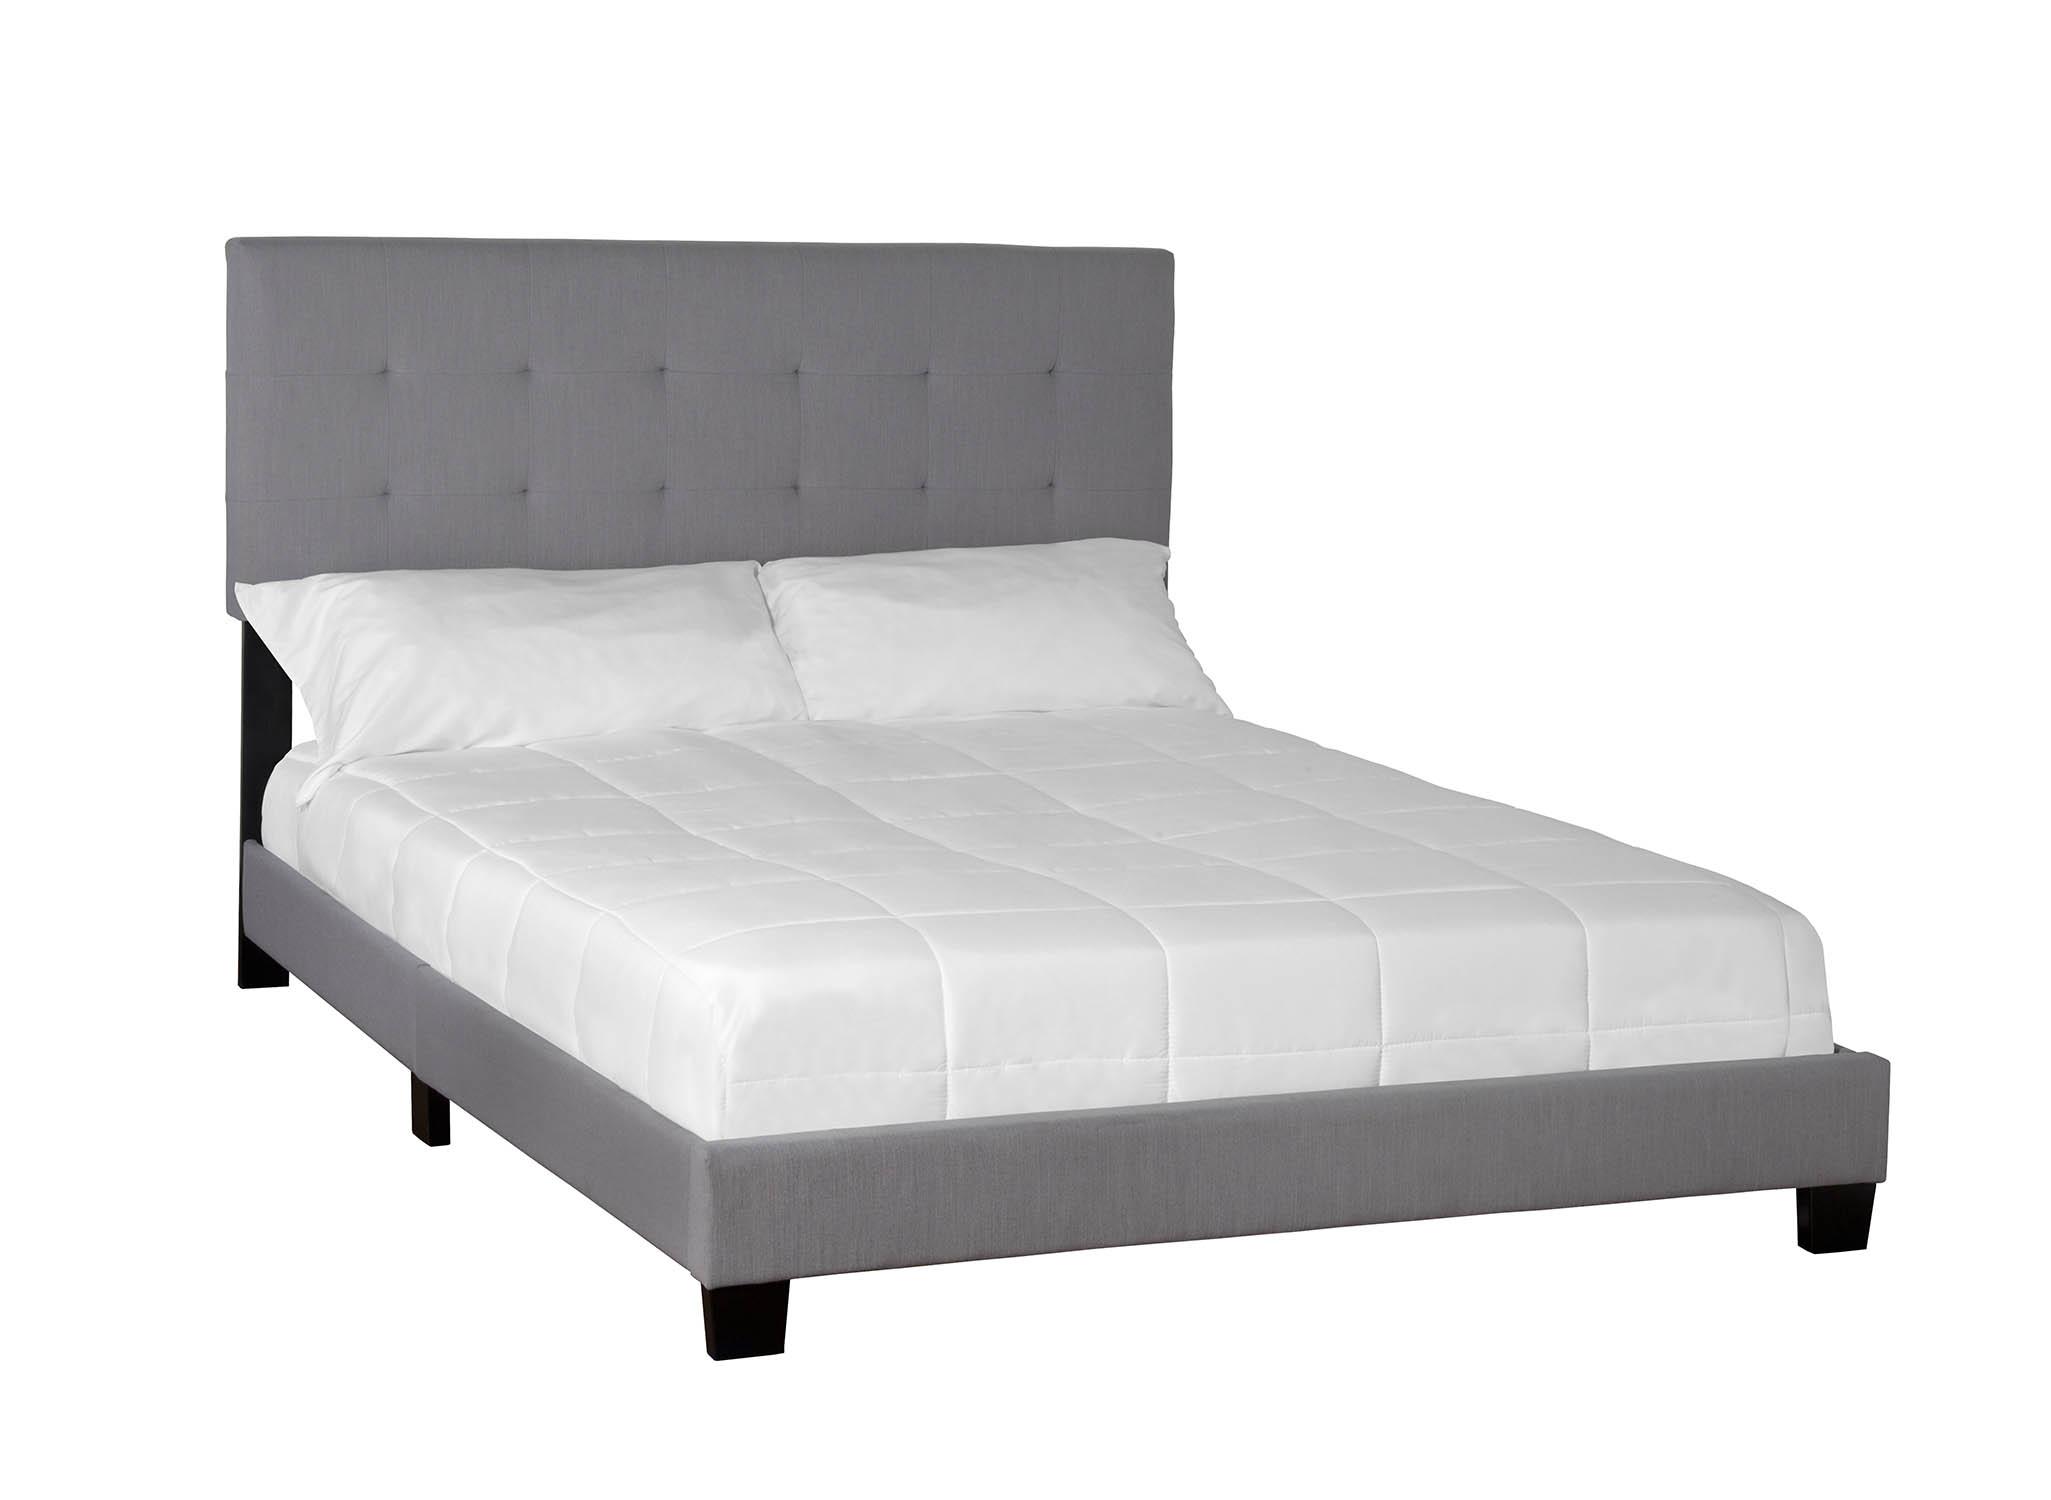 Modern, Transitional Panel Bed EDEN 1600-104 1600-104 in Gray Fabric